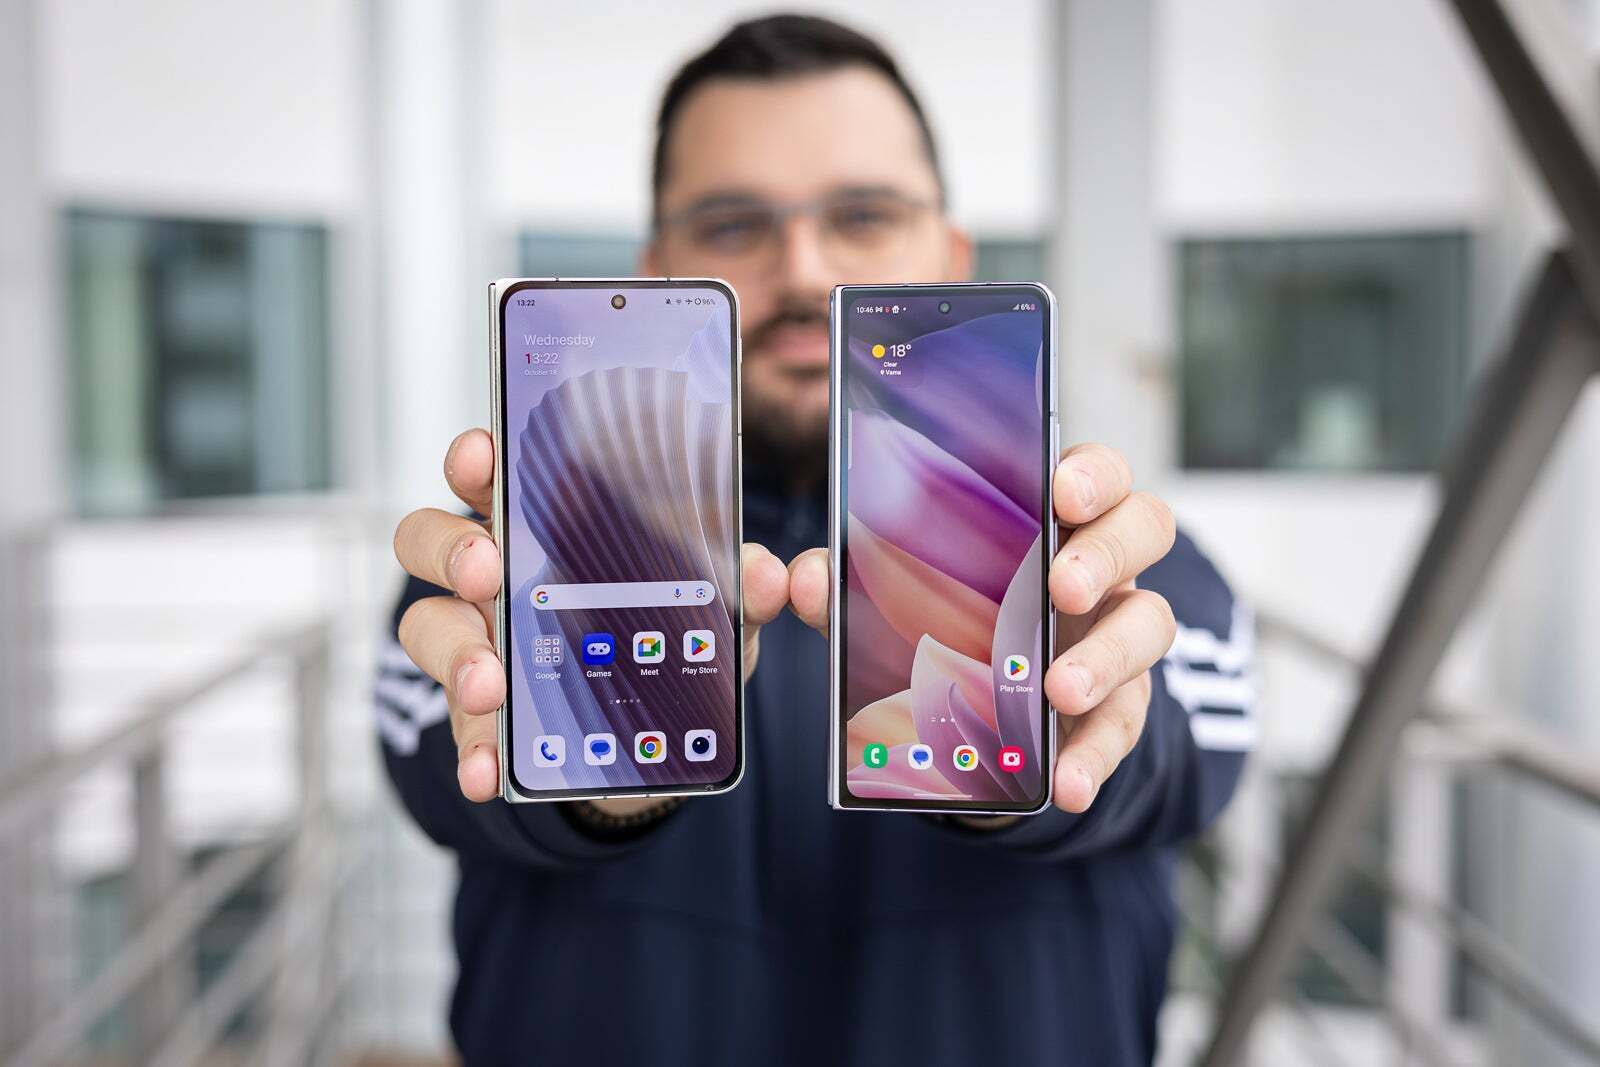 Z Fold 5 (right) next to the wider OnePlus Open - &quot;I&#039;ve wanted this since the start!&quot; - Z Fold 5 user reacts to Galaxy Z Fold 6 leaks